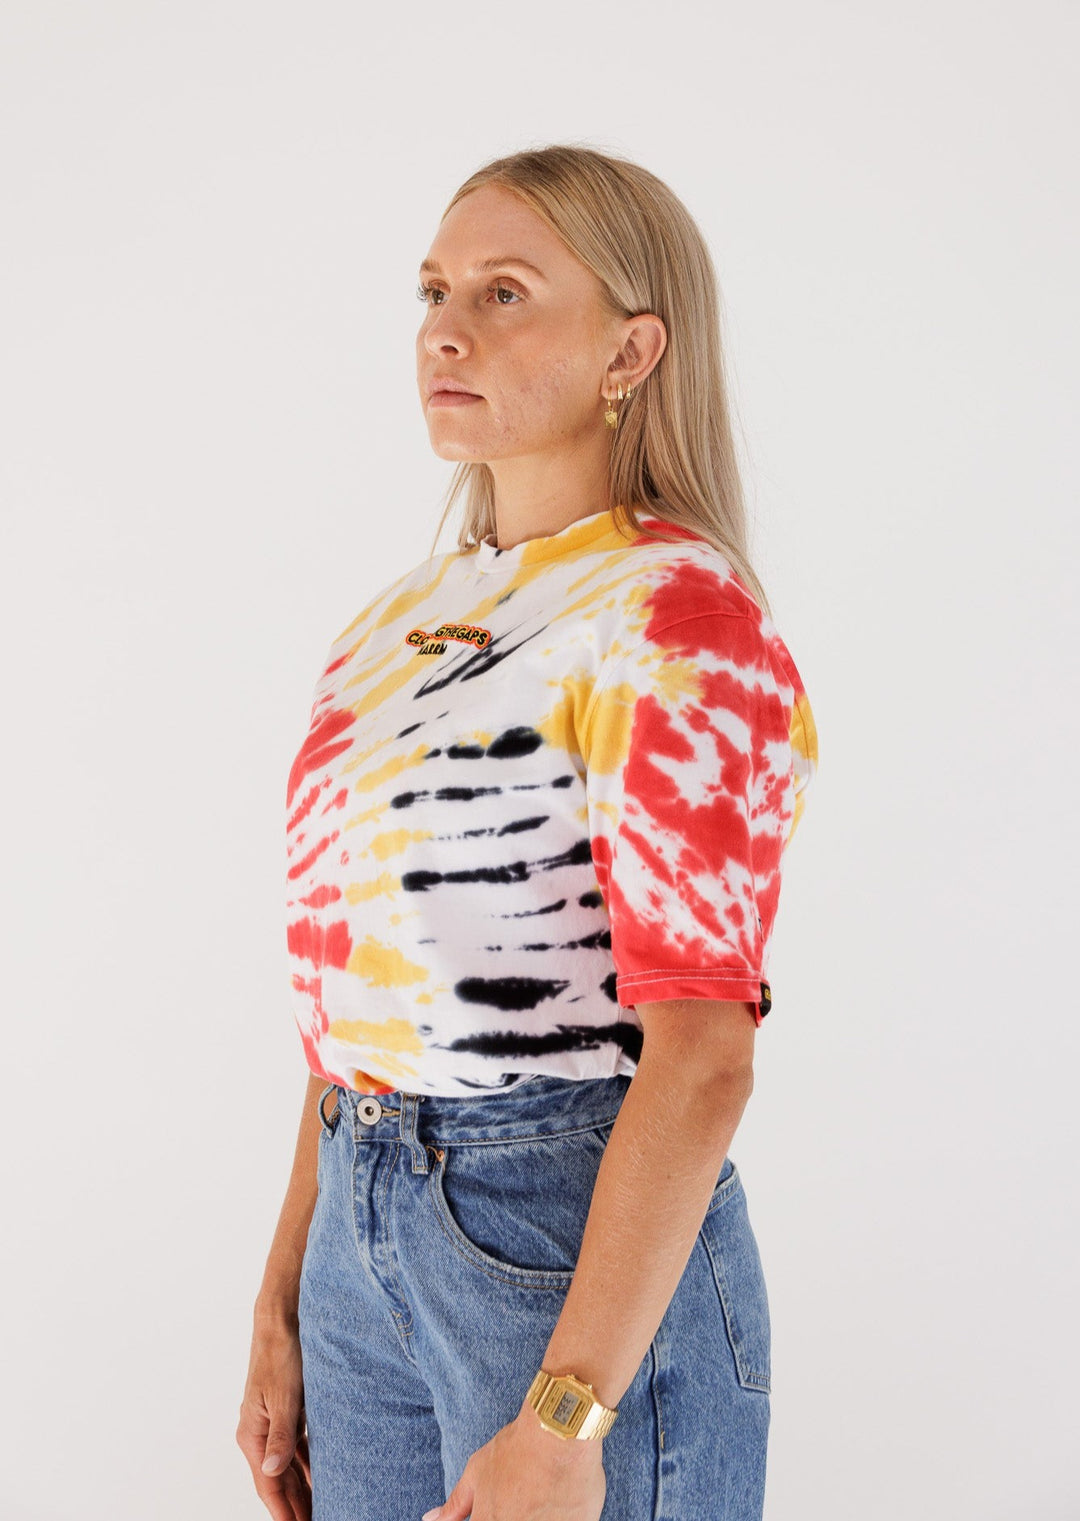 Clothing The Gaps. Tie Dye Spirit Tee. White T-shirt. With Red, black and yellow tie died in random pattern. Has embroidered 'Clothing The Gaps' on front chest with minimalist font in black text with a yellow and red outline and 'Narrm' in black embroidered underneath, acknowledging the land on which Clothing The Gaps operates it's social enterprise.